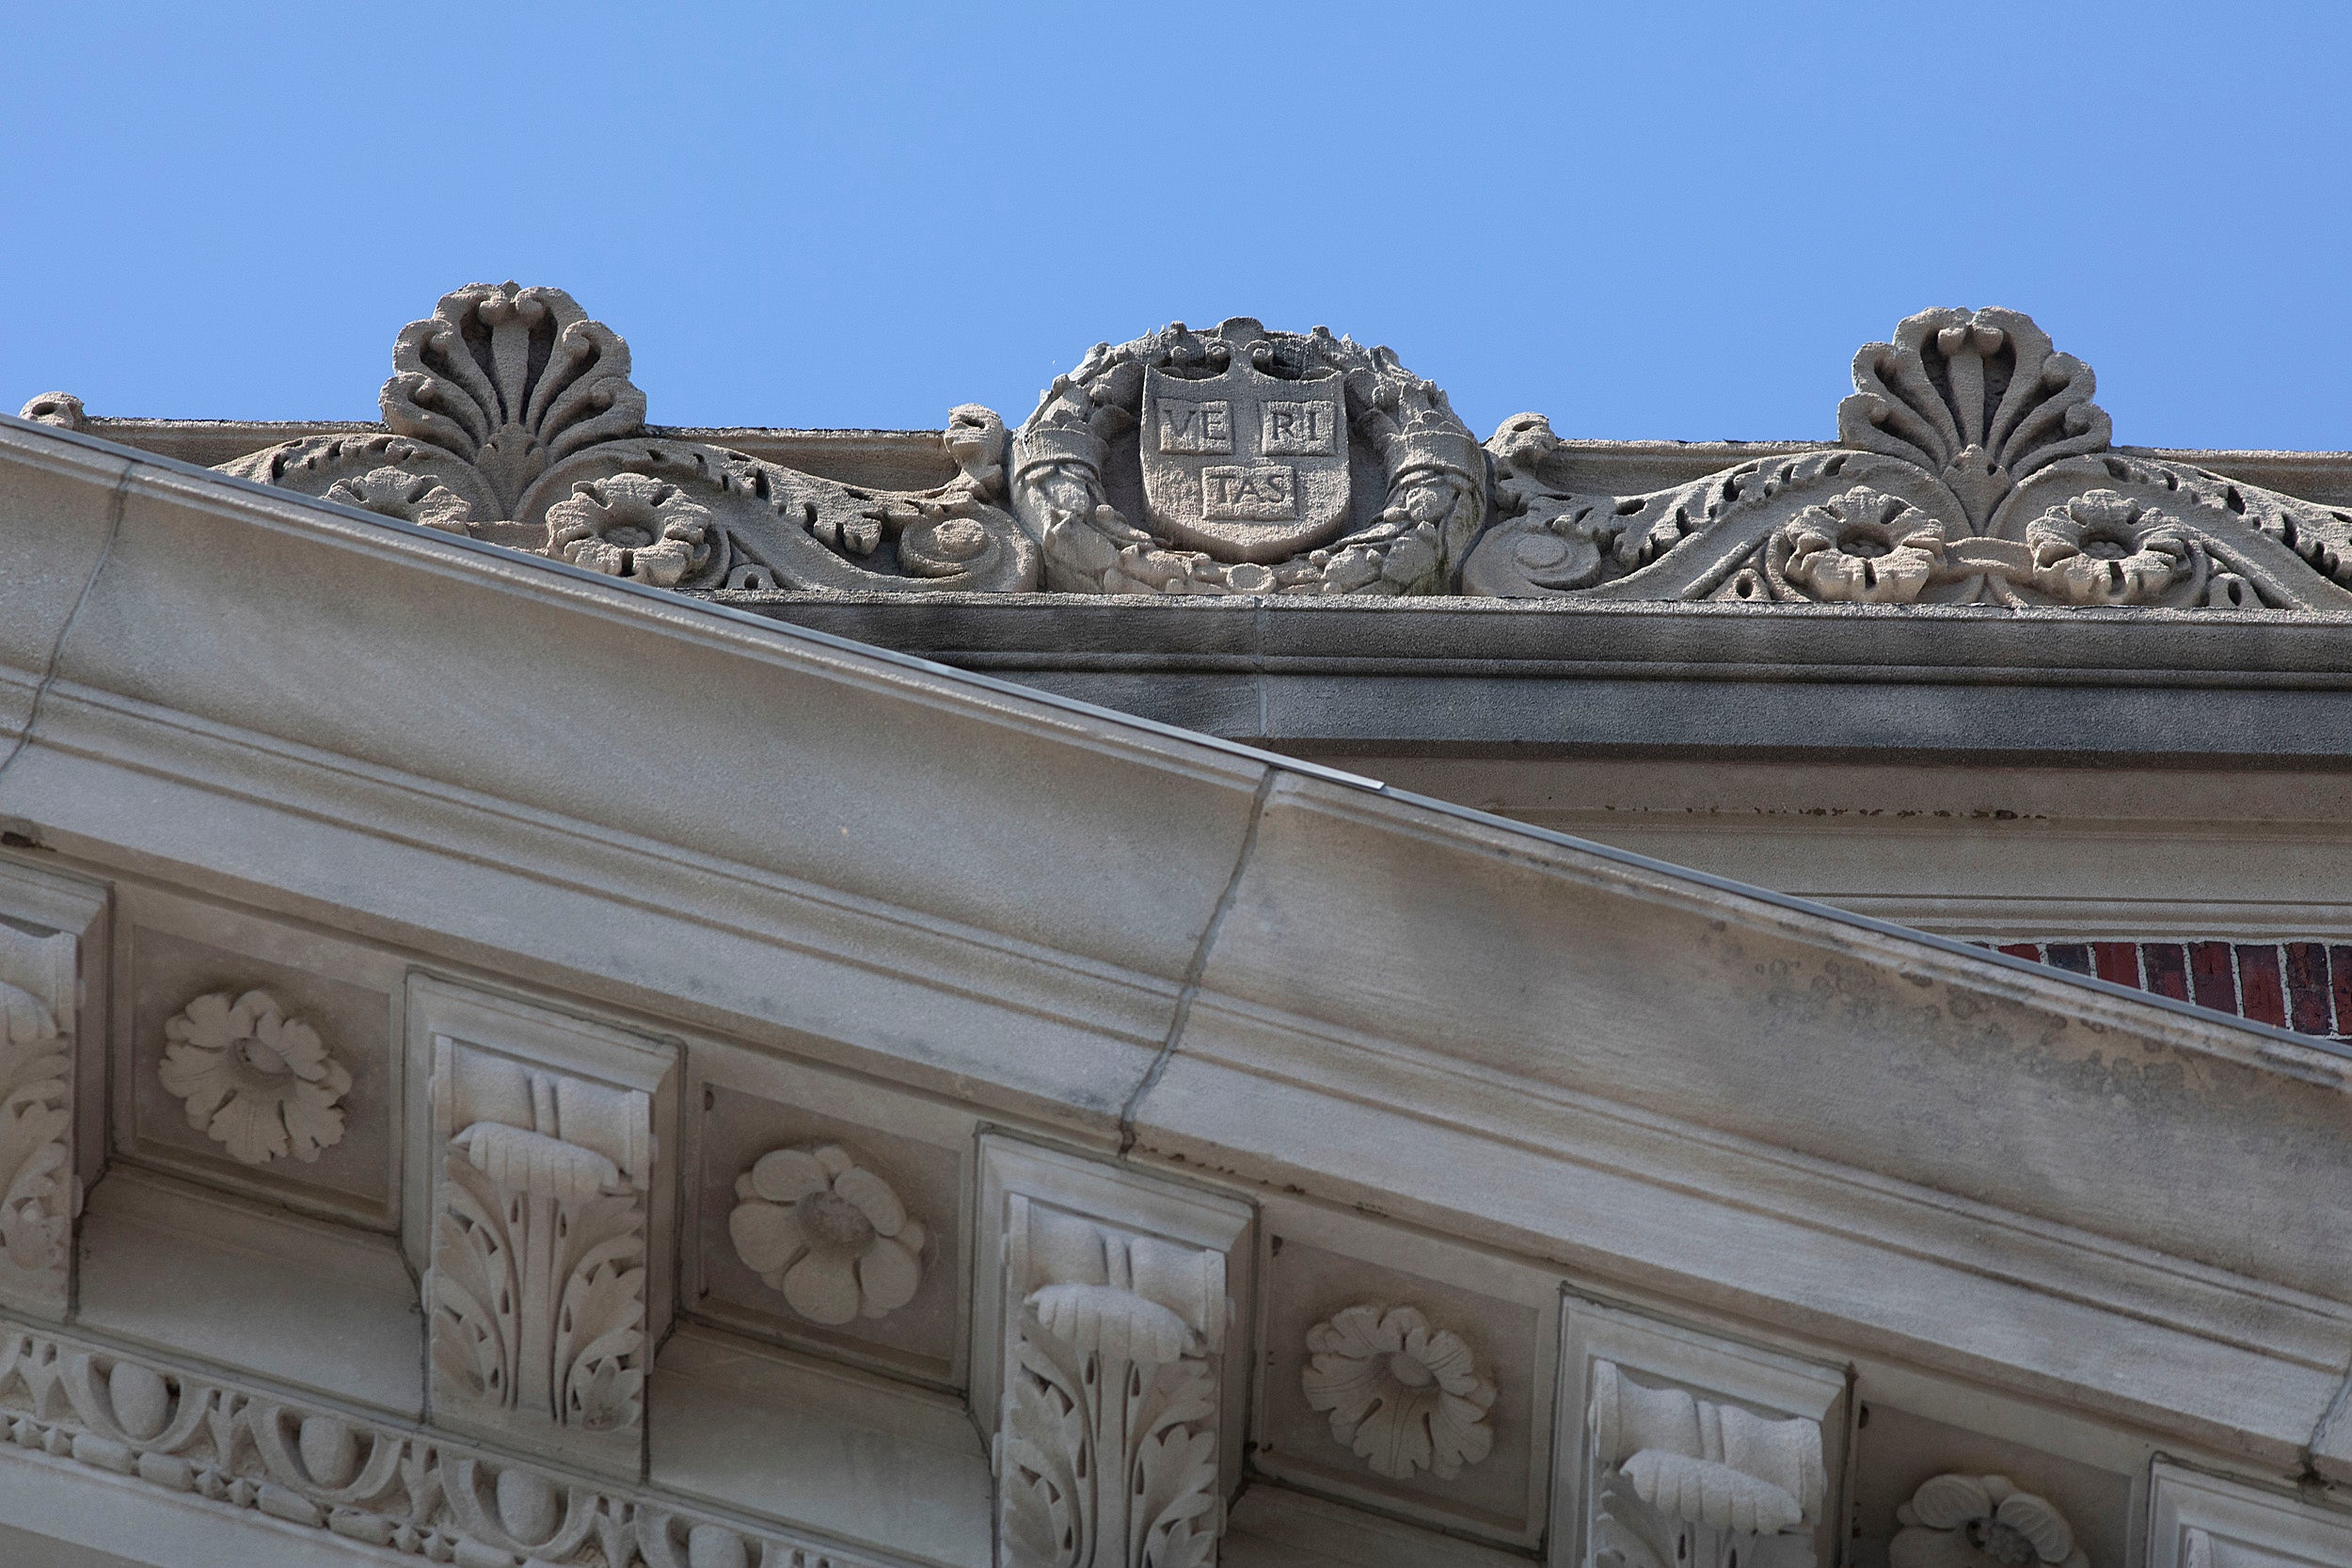 Views of Widener Library's roof, with stone veritas and Harvard shields.